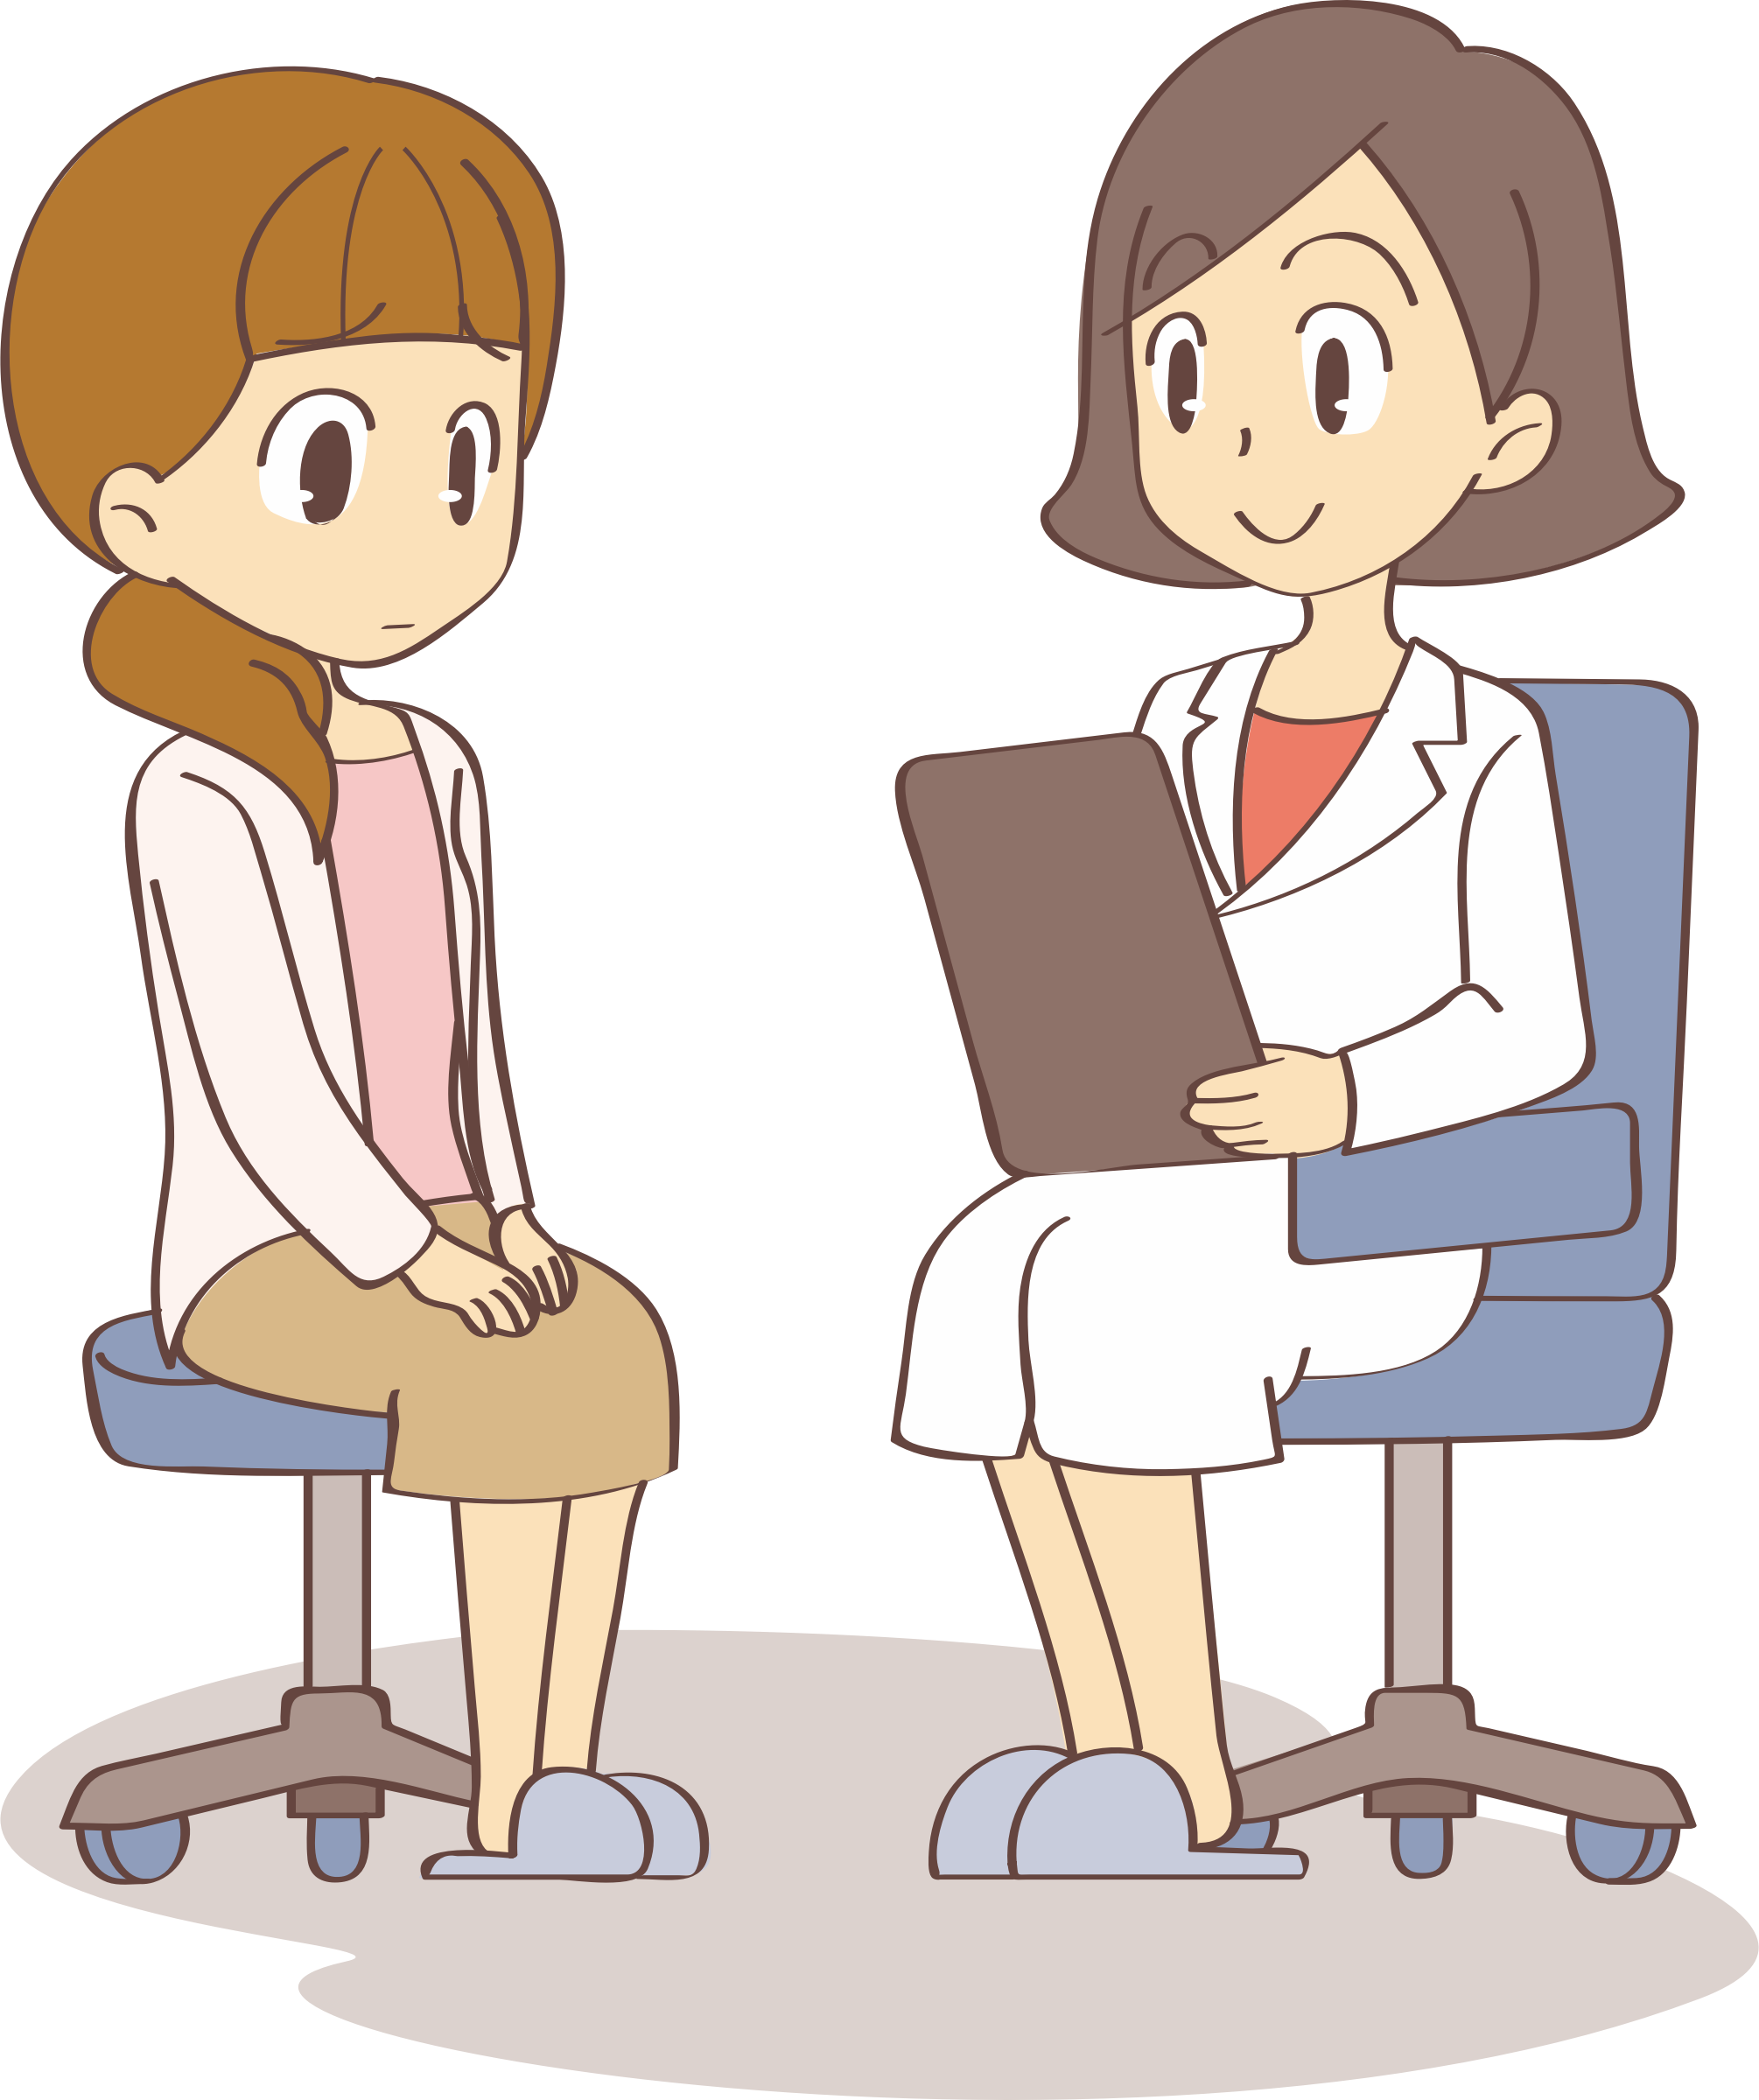 Clipboard clipart medical. Consultation icons png free